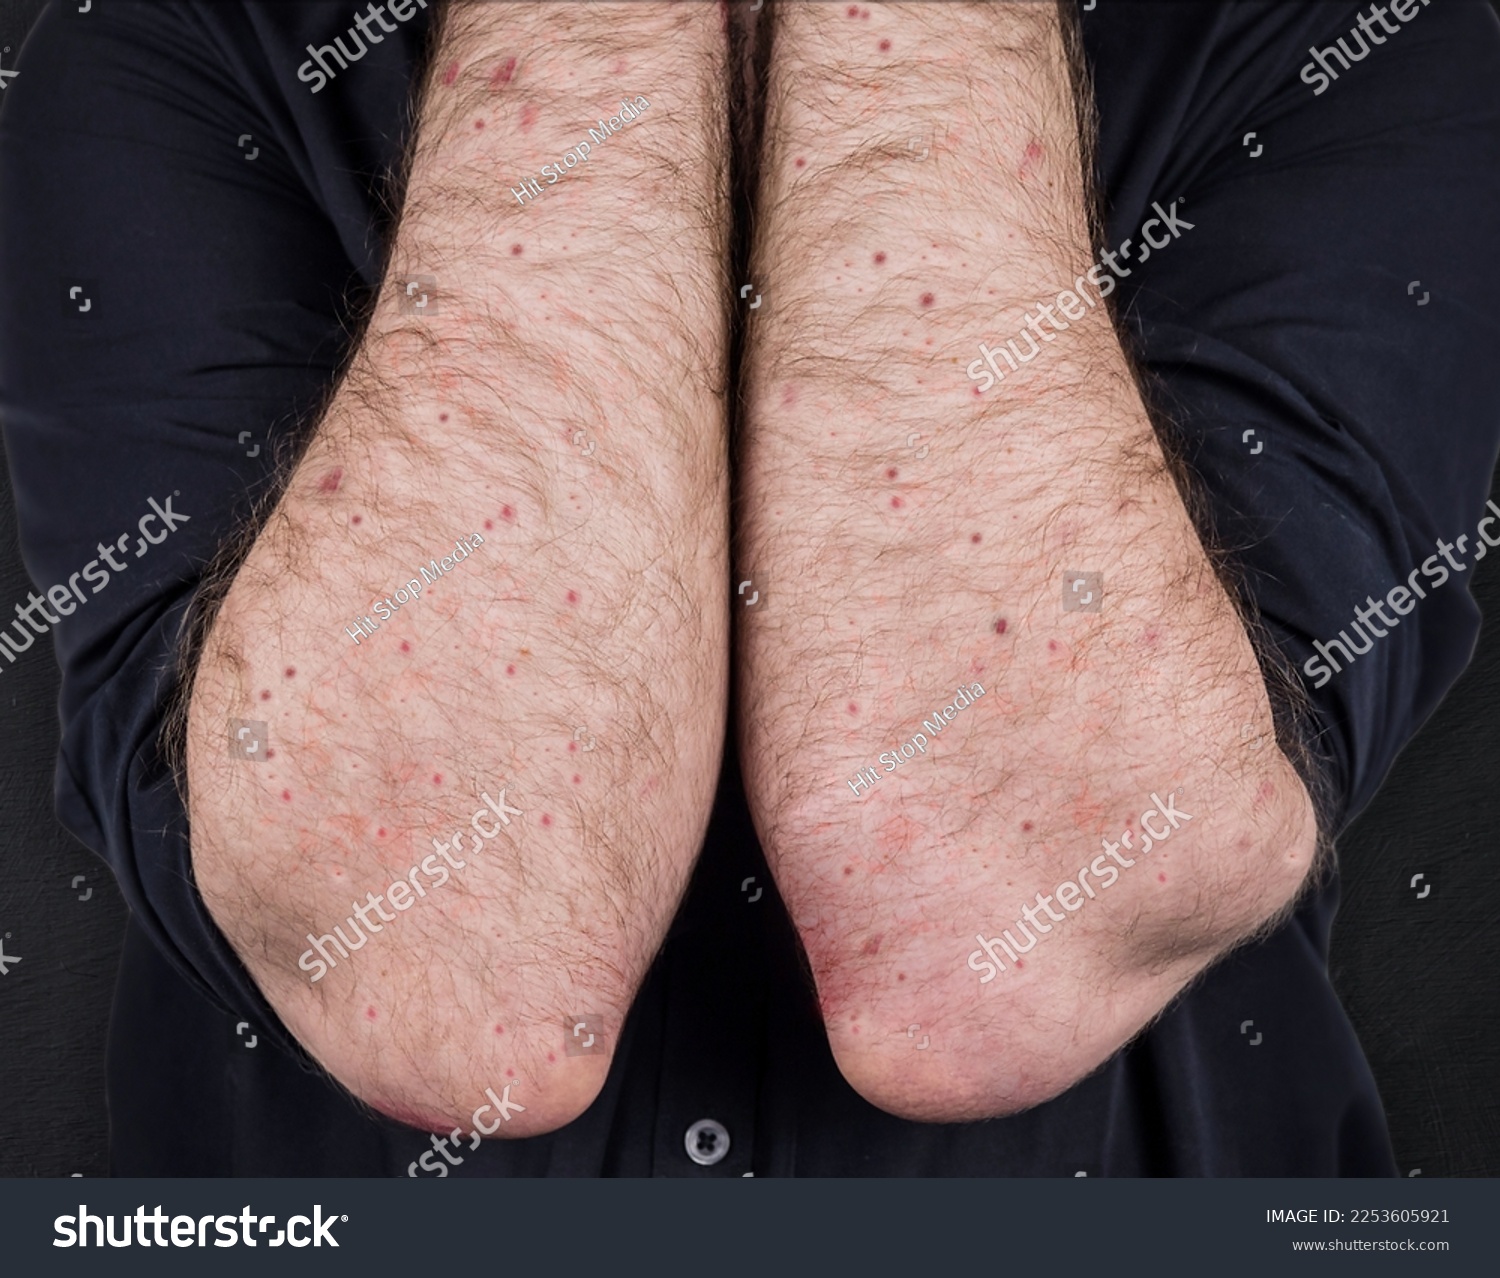 Measles. Viral disease of immunodeficiency dermatitis rash on the body of a man, scratch with itching, viral exanthema. A patient with monkeypox. Painful rash, red spots, blisters on the arm. #2253605921